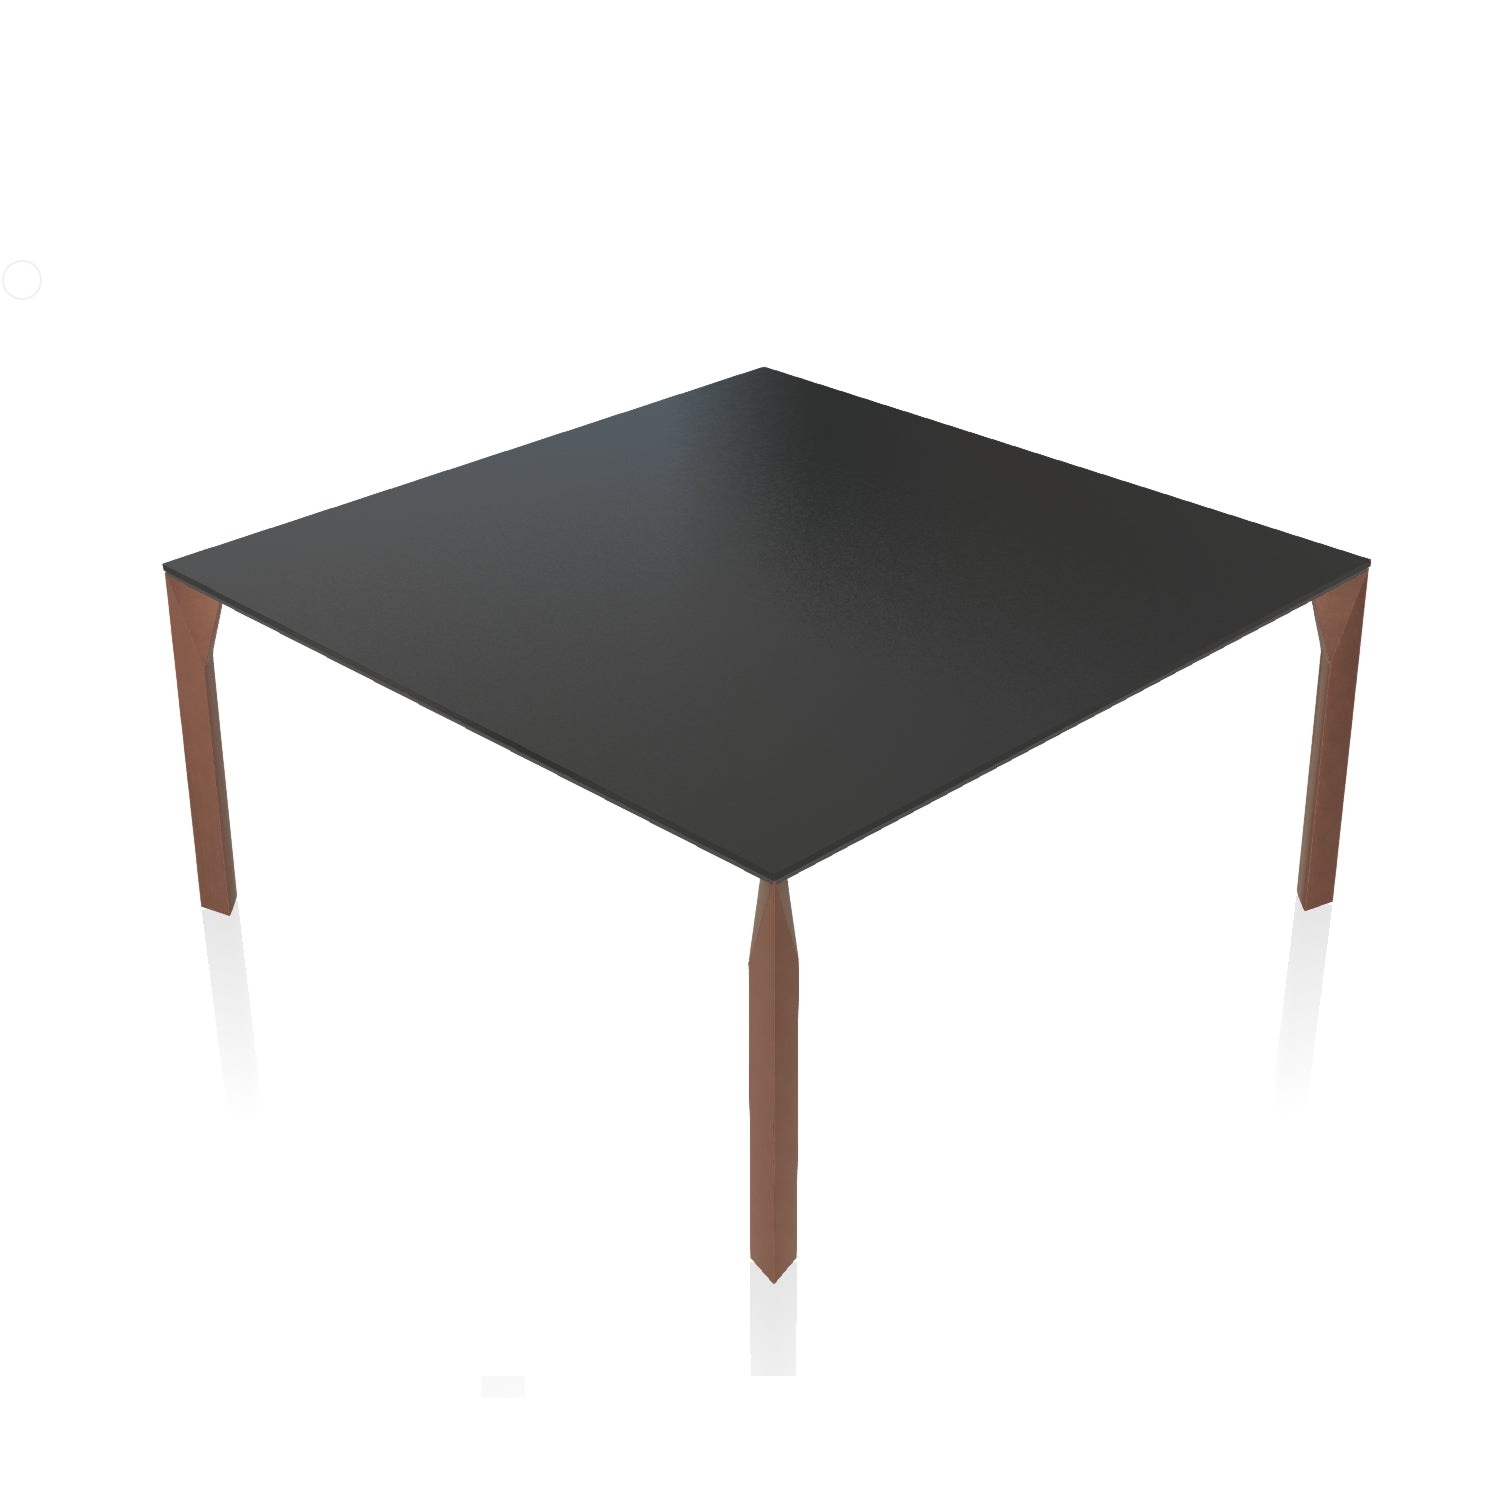 Mirage Dining Table By Bontempi Casa